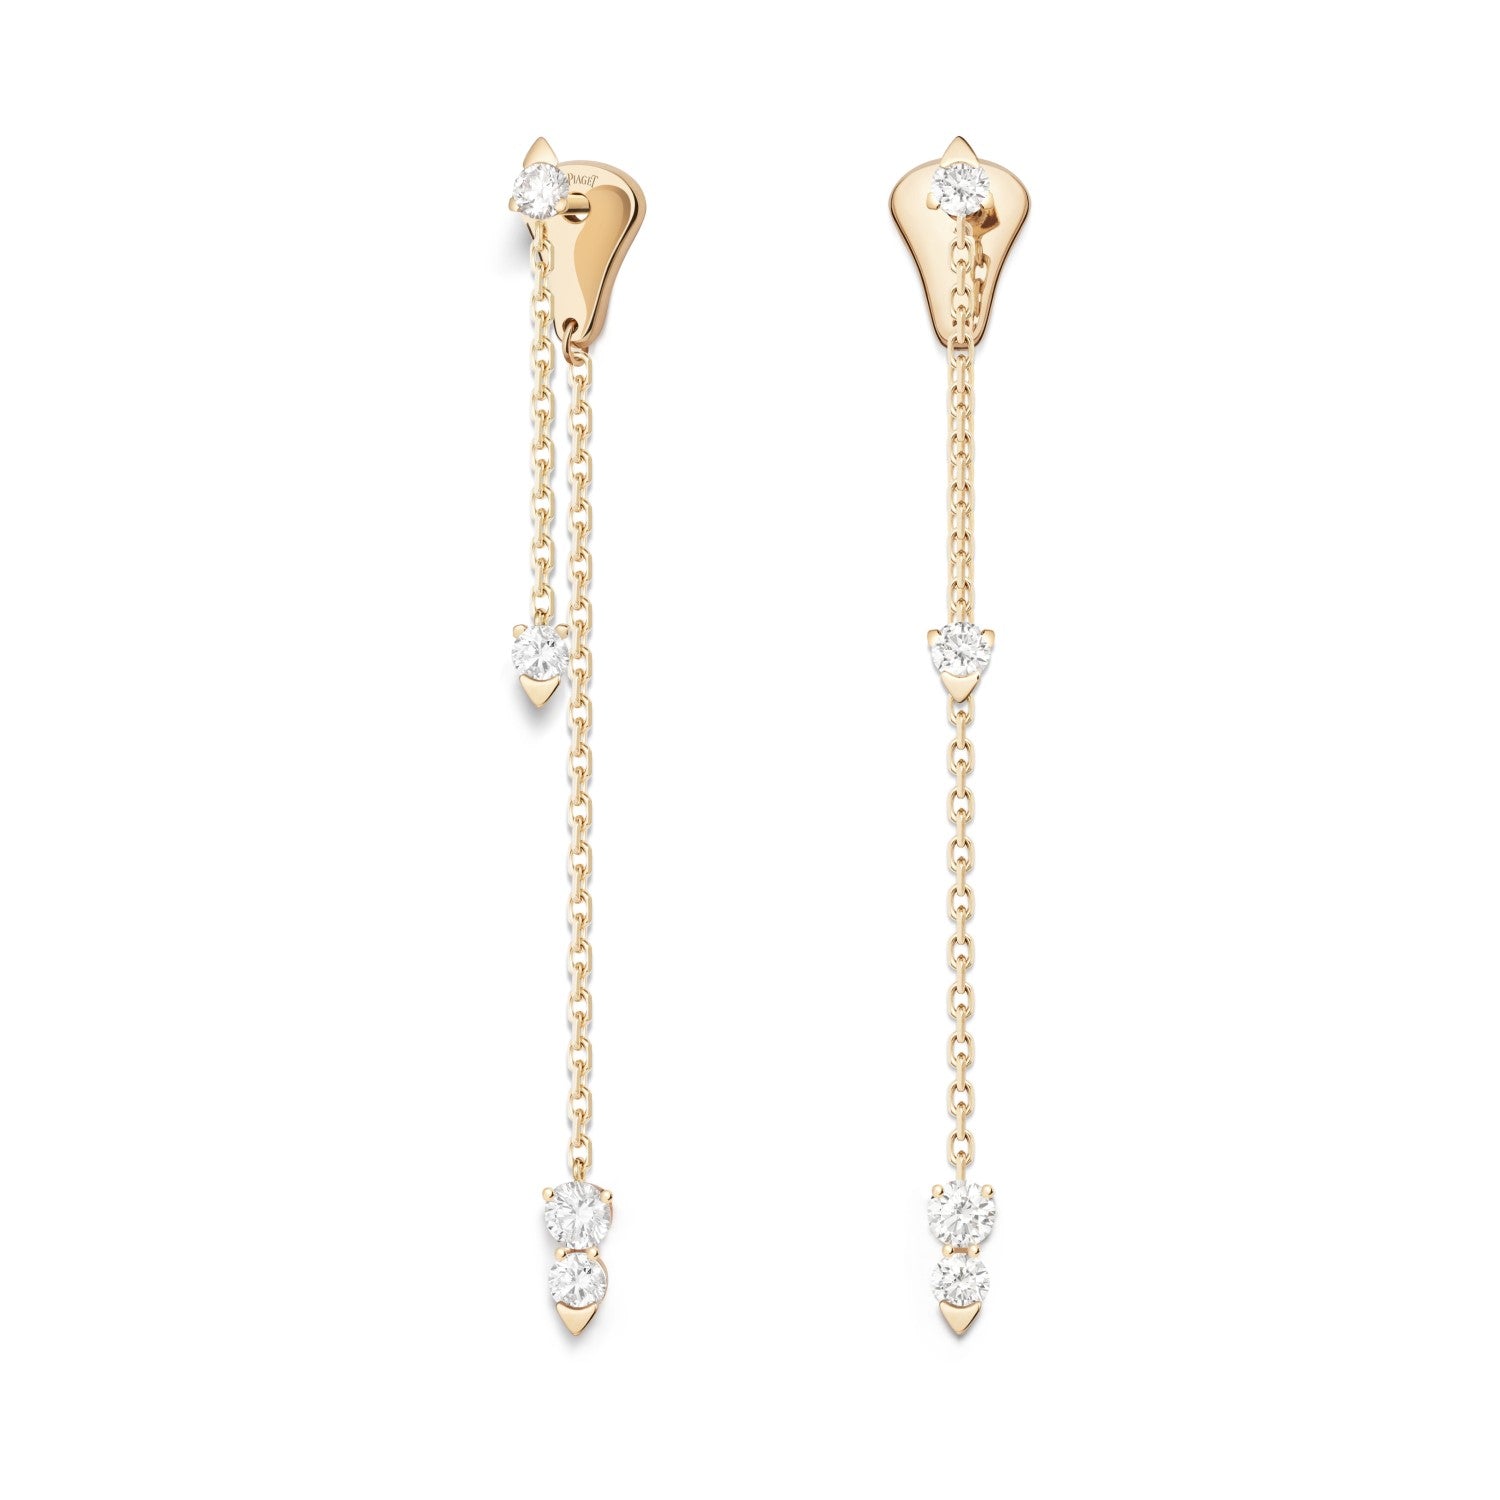 Piaget Sunlight earrings in 18K rose gold set with 8 brilliant-cut diamonds (approx. 0.54 ct).